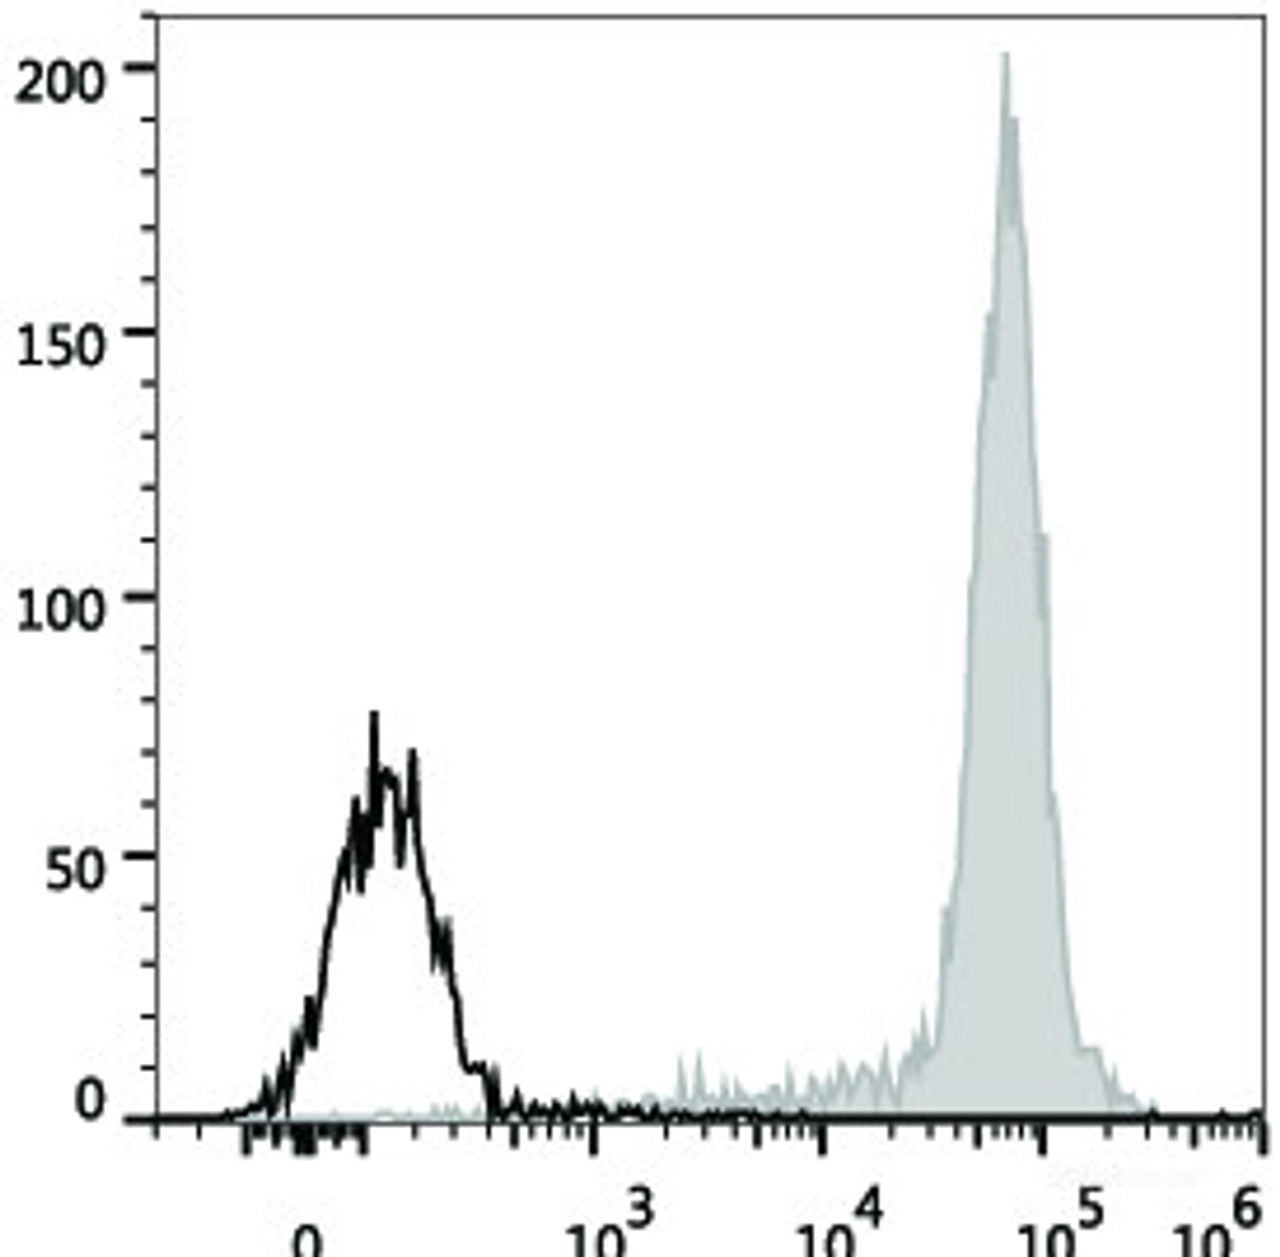 Human pheripheral blood monocytes are stained with APC Anti-Human CD14 Antibody(filled gray histogram). Unstained pheripheral blood monocytes (blank black histogram) are used as control.